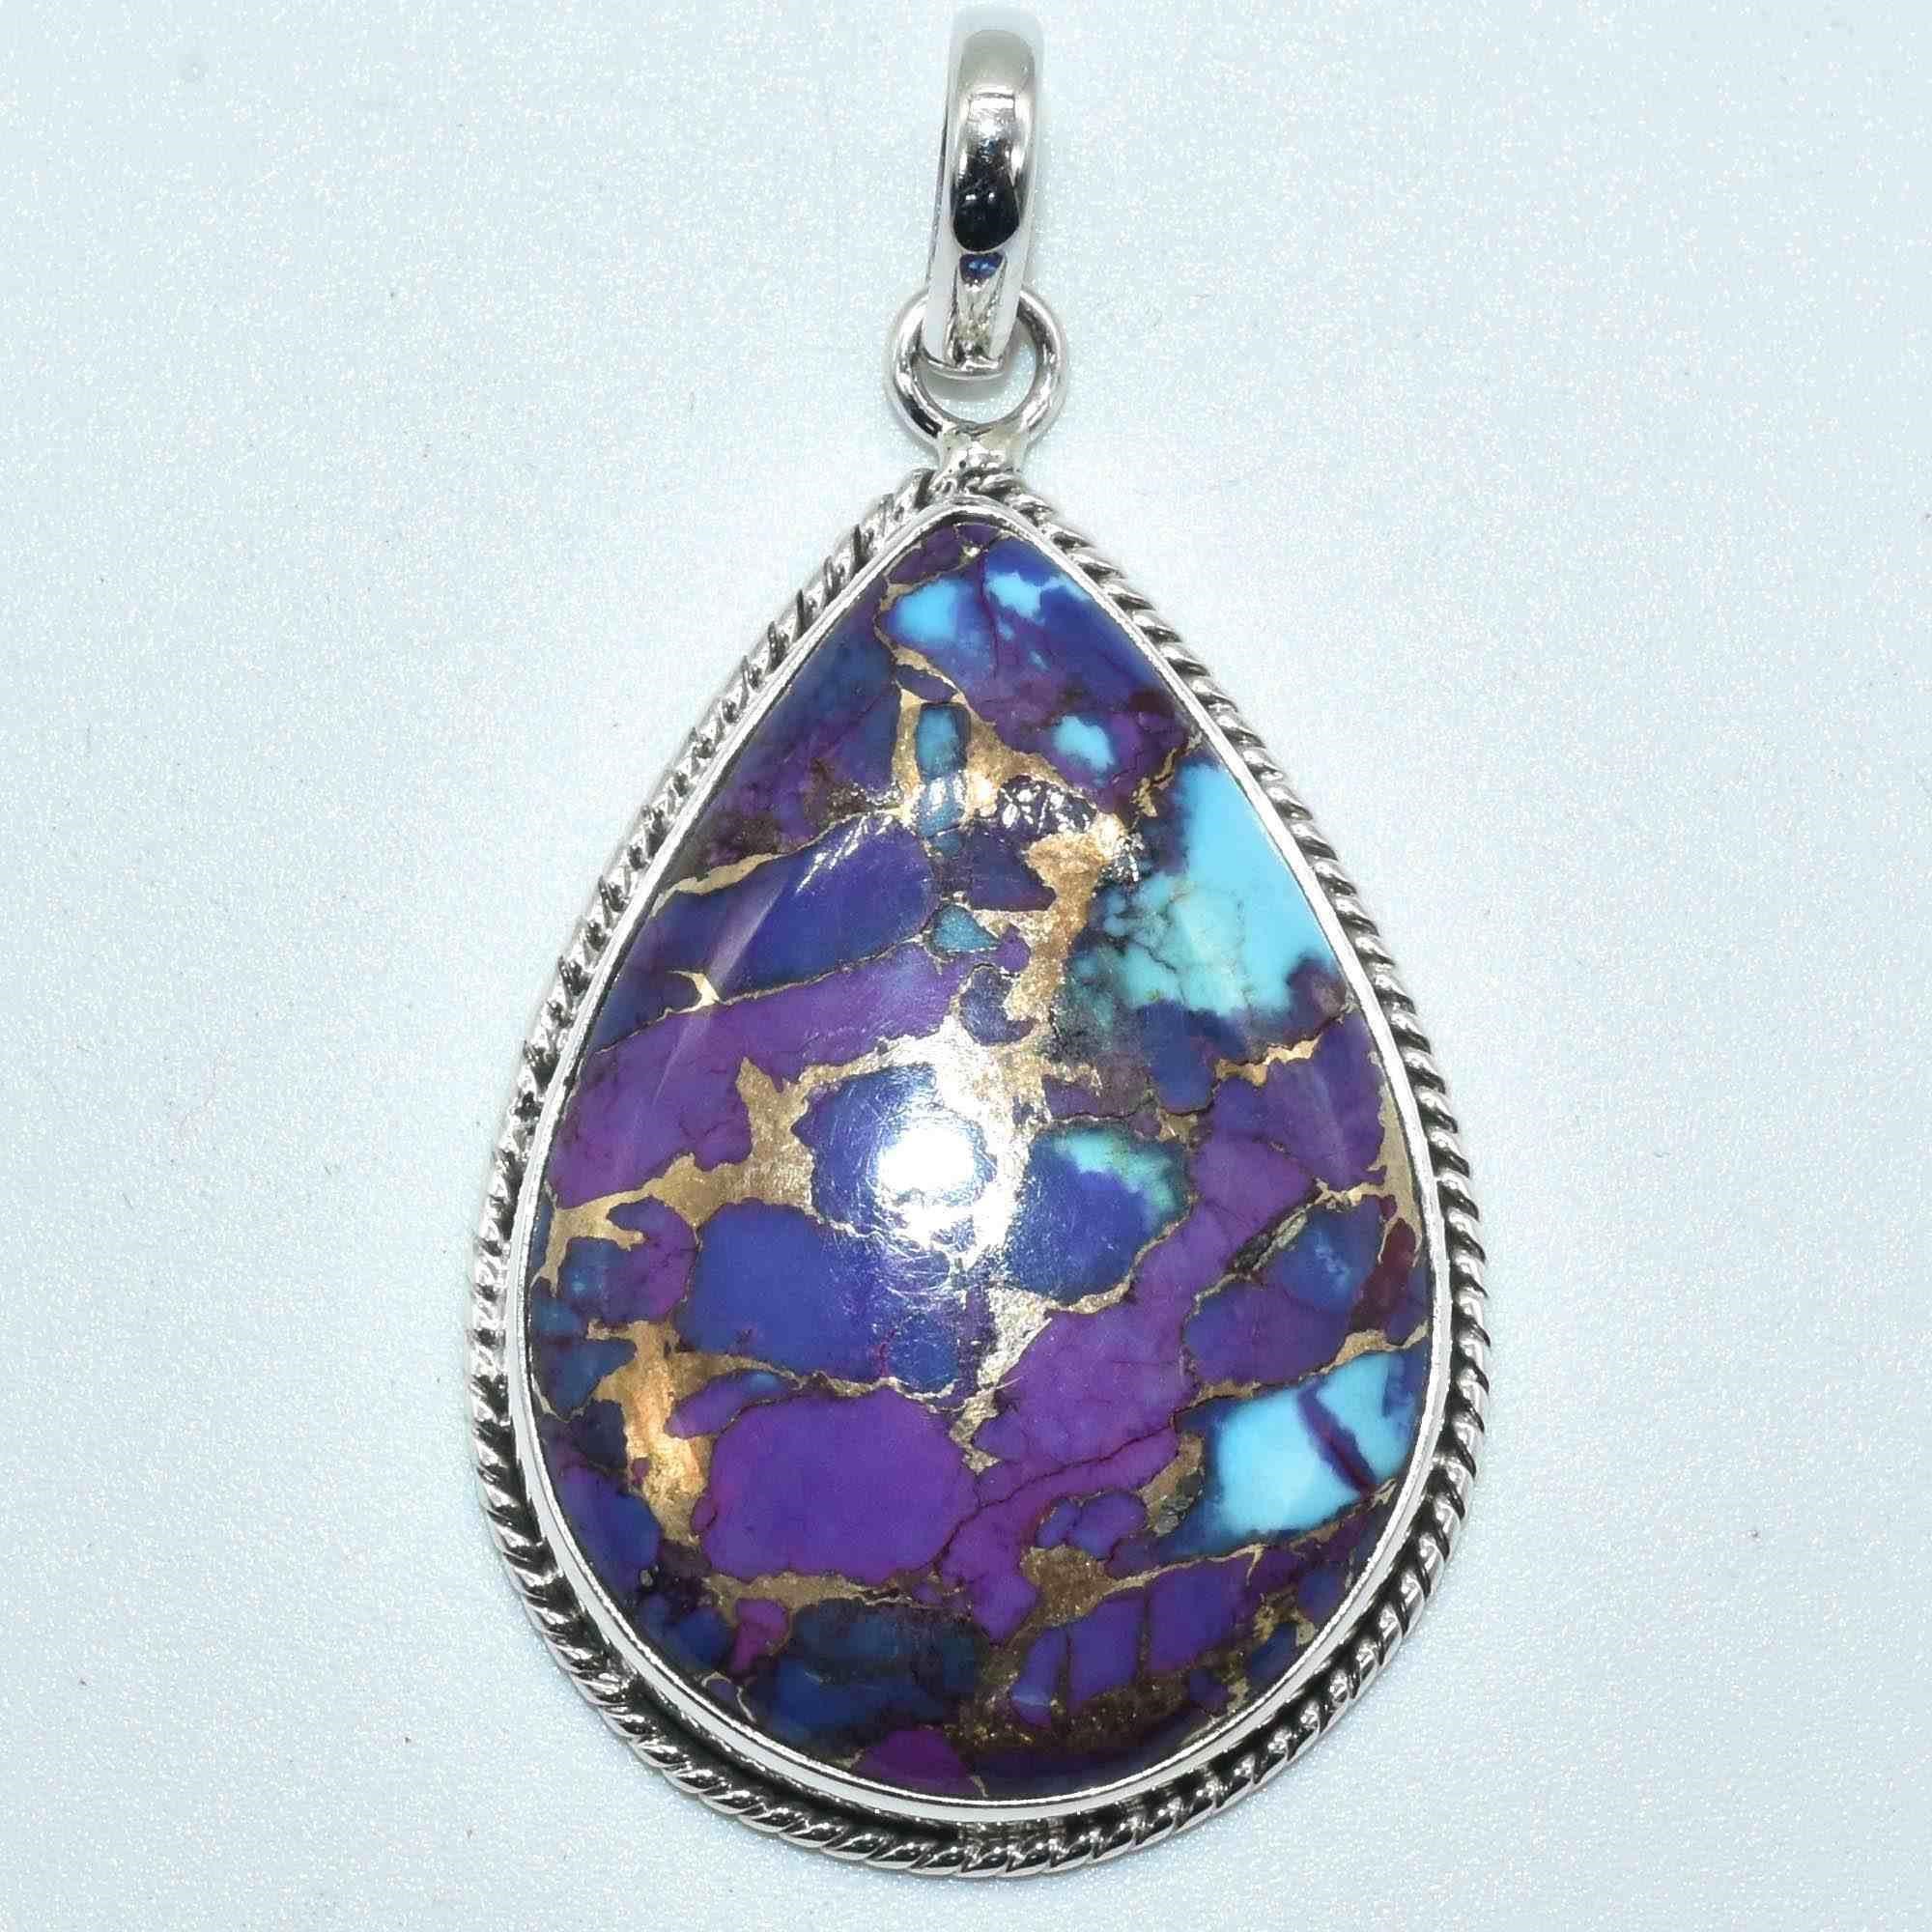 March Jewelry Auction